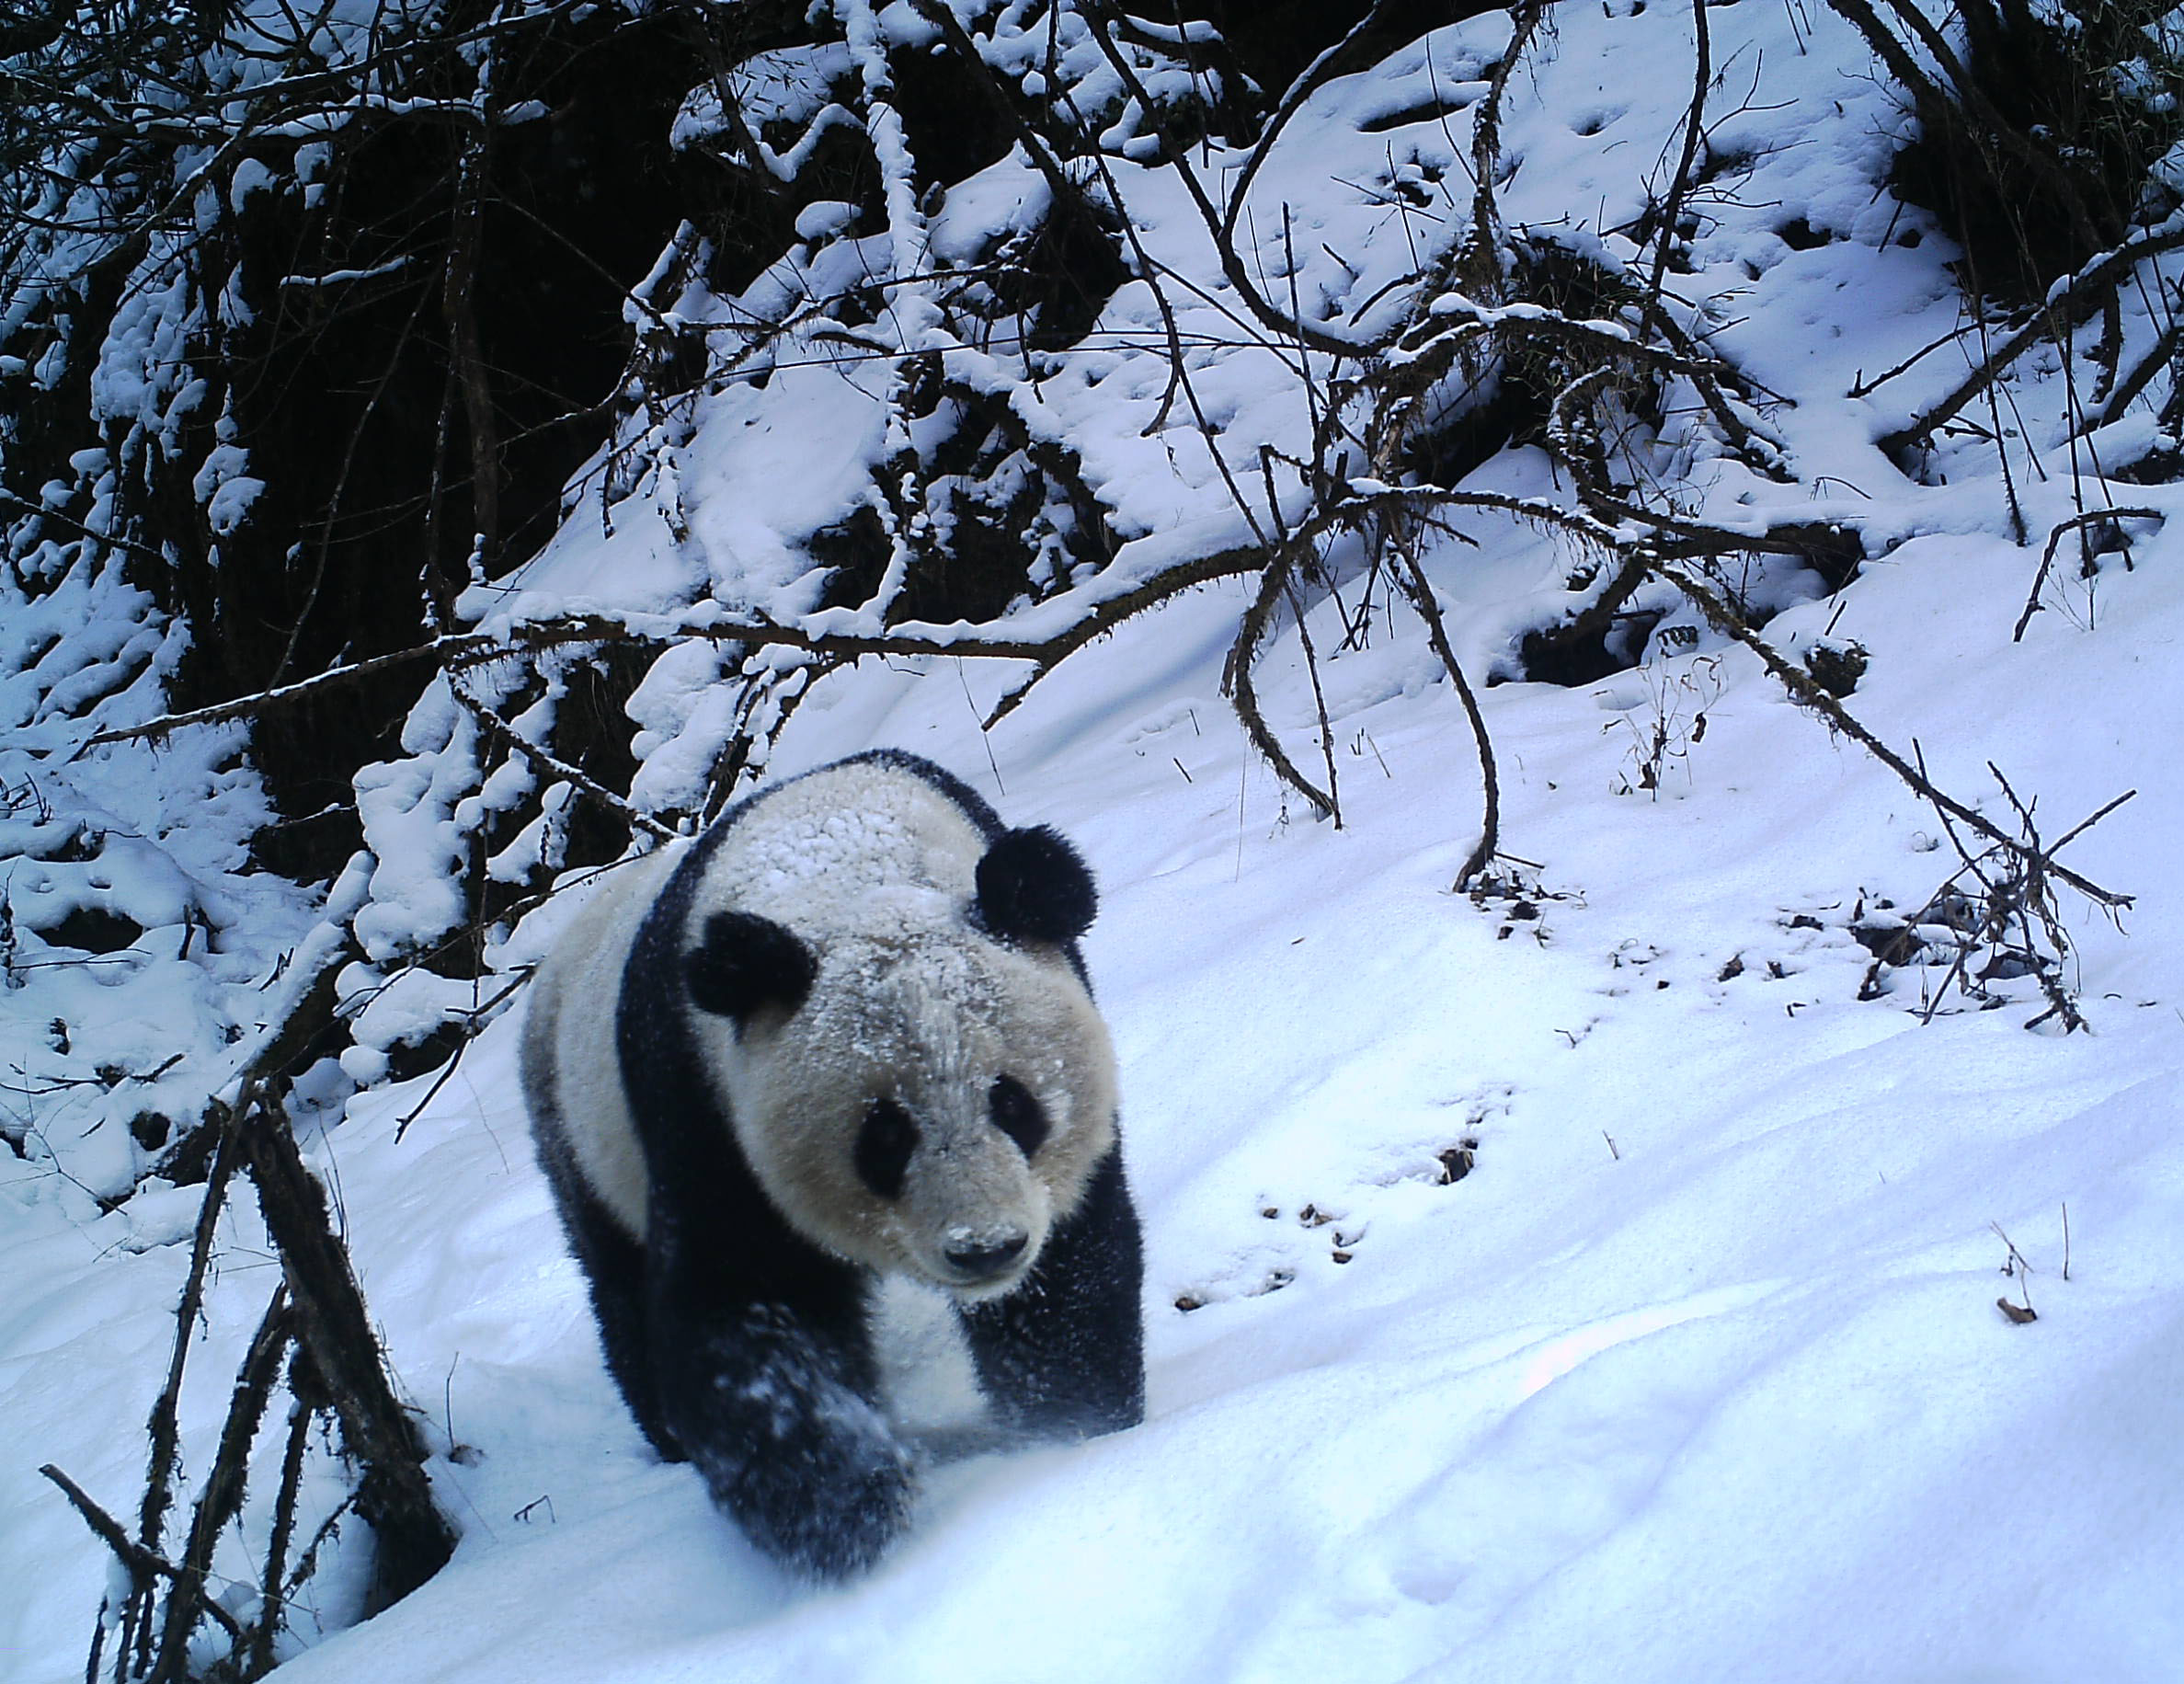 A peek at the secret life of pandas | Center for Systems Integration ...